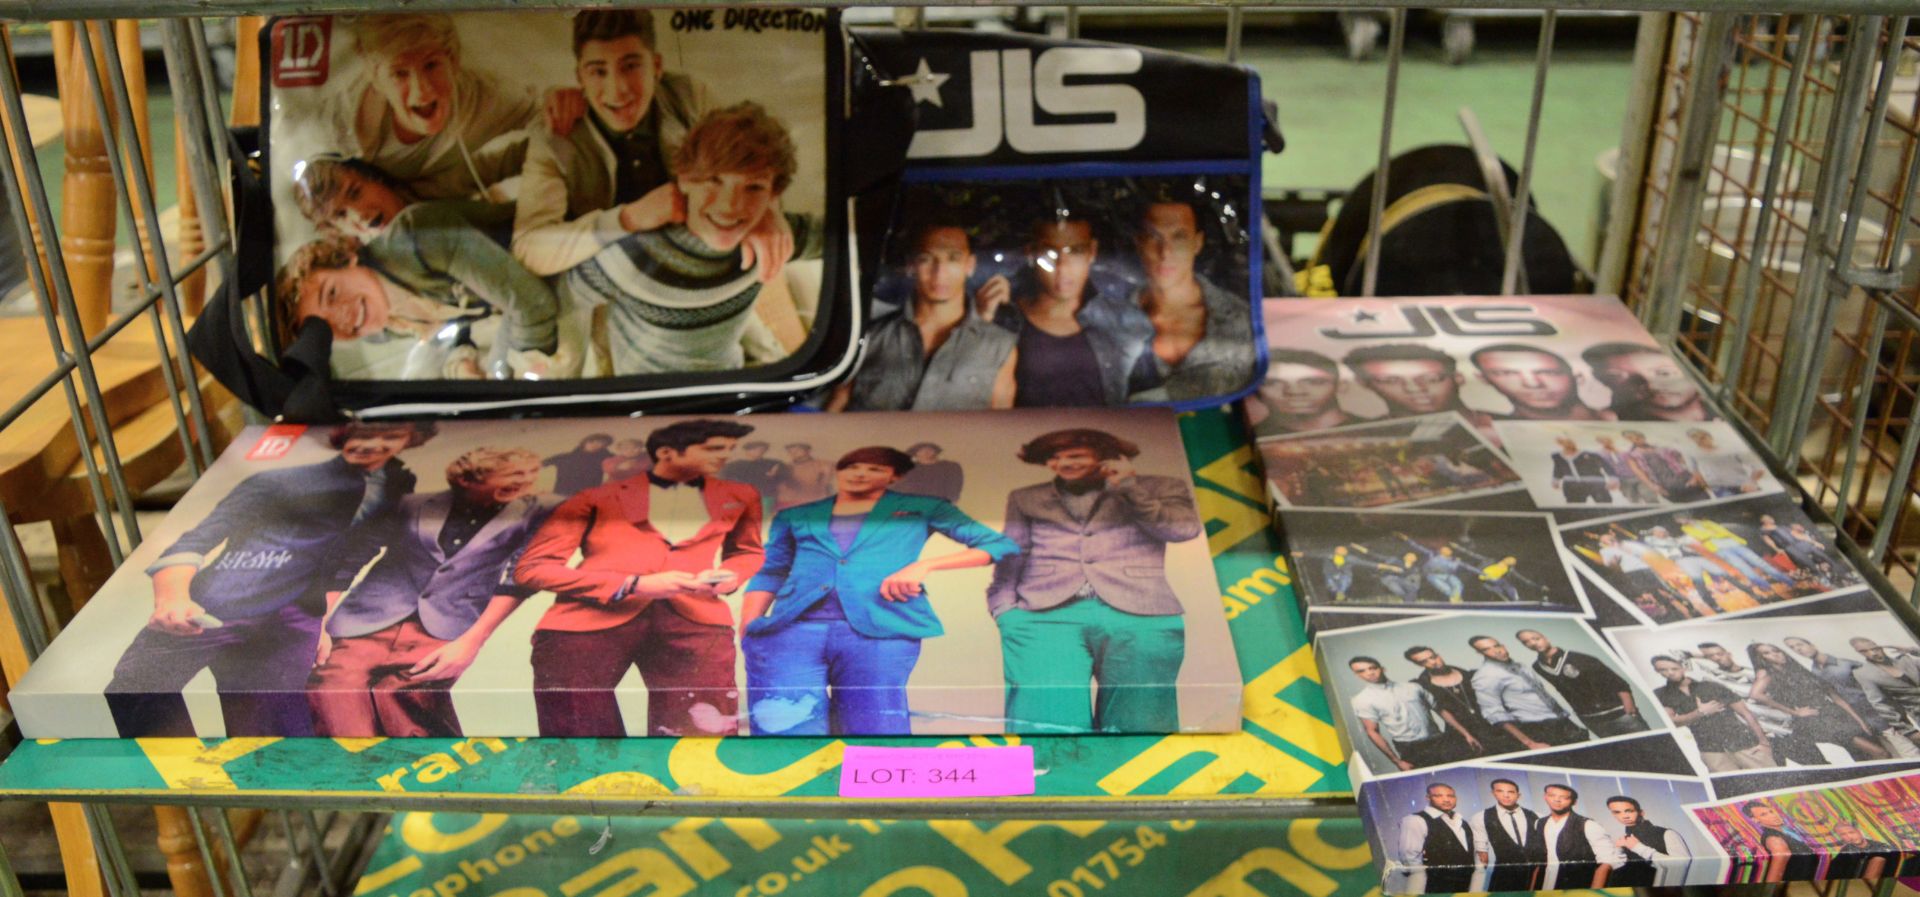 JLS & One Direction Canvas Pictures & Bags.